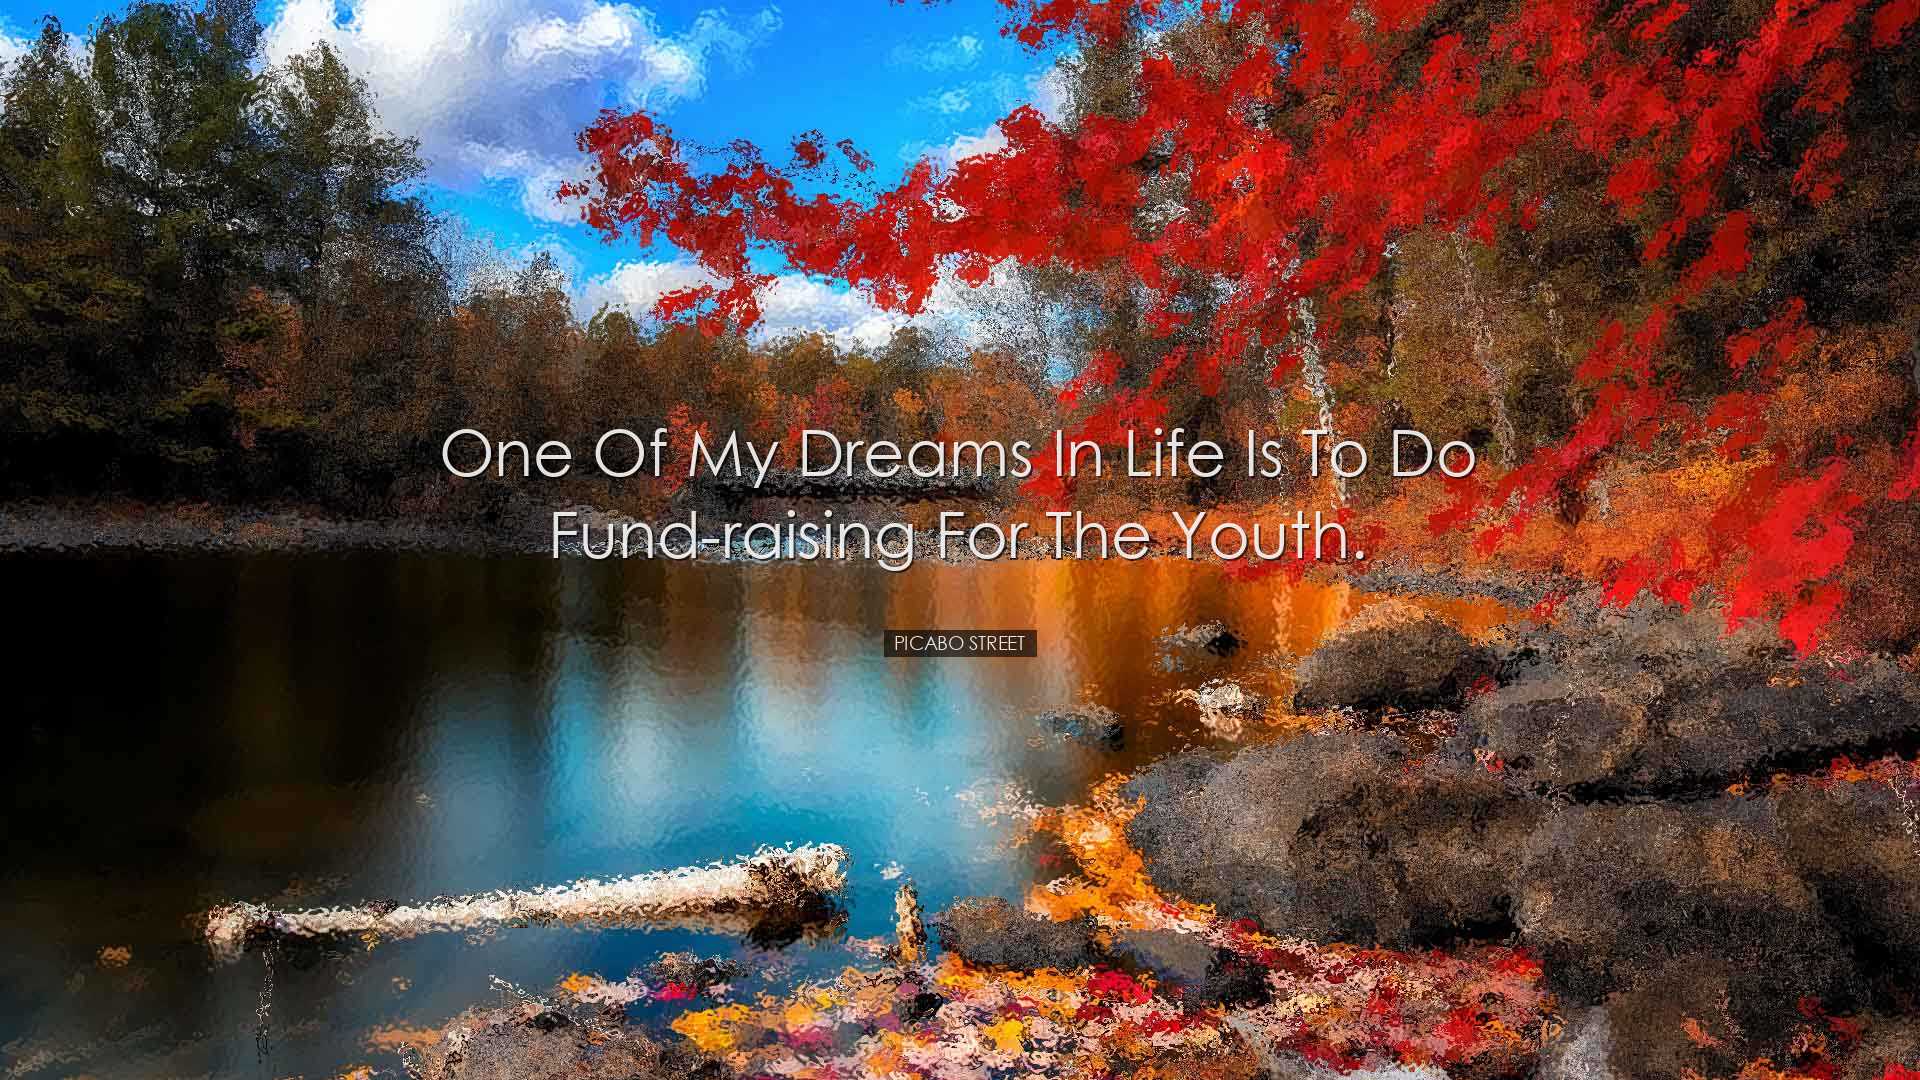 One of my dreams in life is to do fund-raising for the youth. - Pi